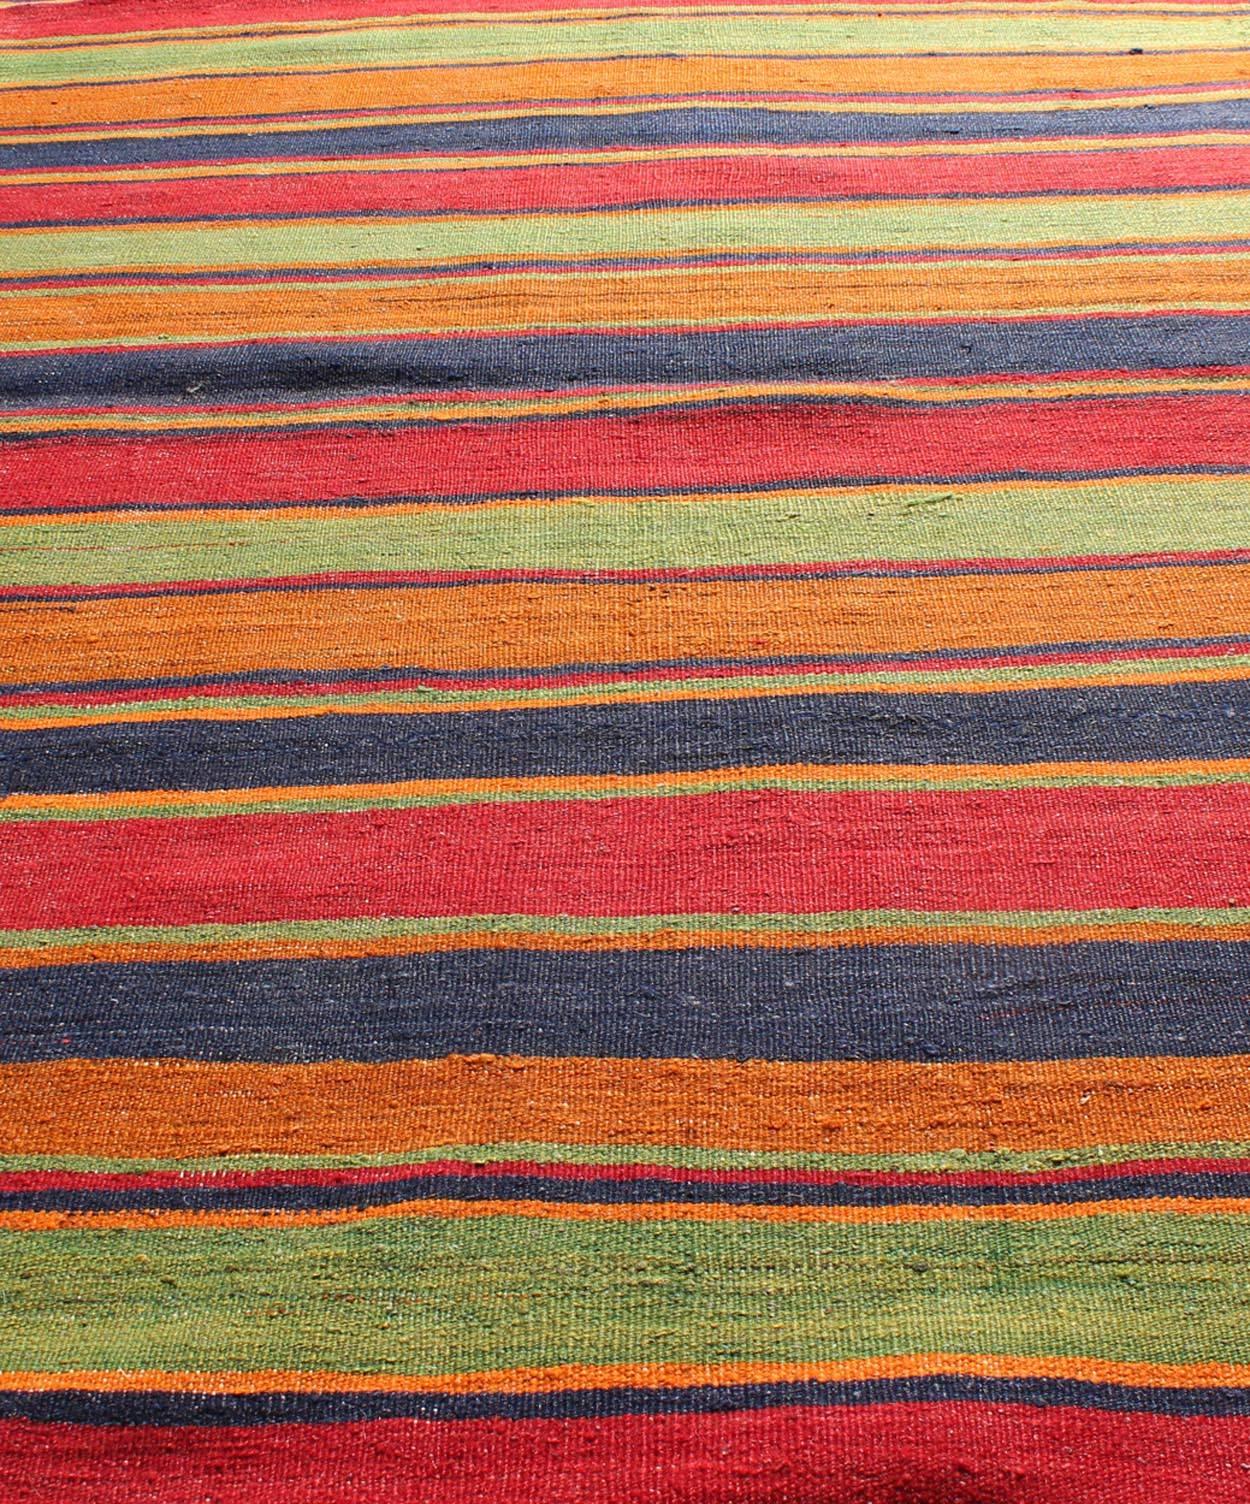 Vintage Kilim Runner with Horizontal Stripes in Orange, Green, Blue, Red, Gold In Excellent Condition For Sale In Atlanta, GA